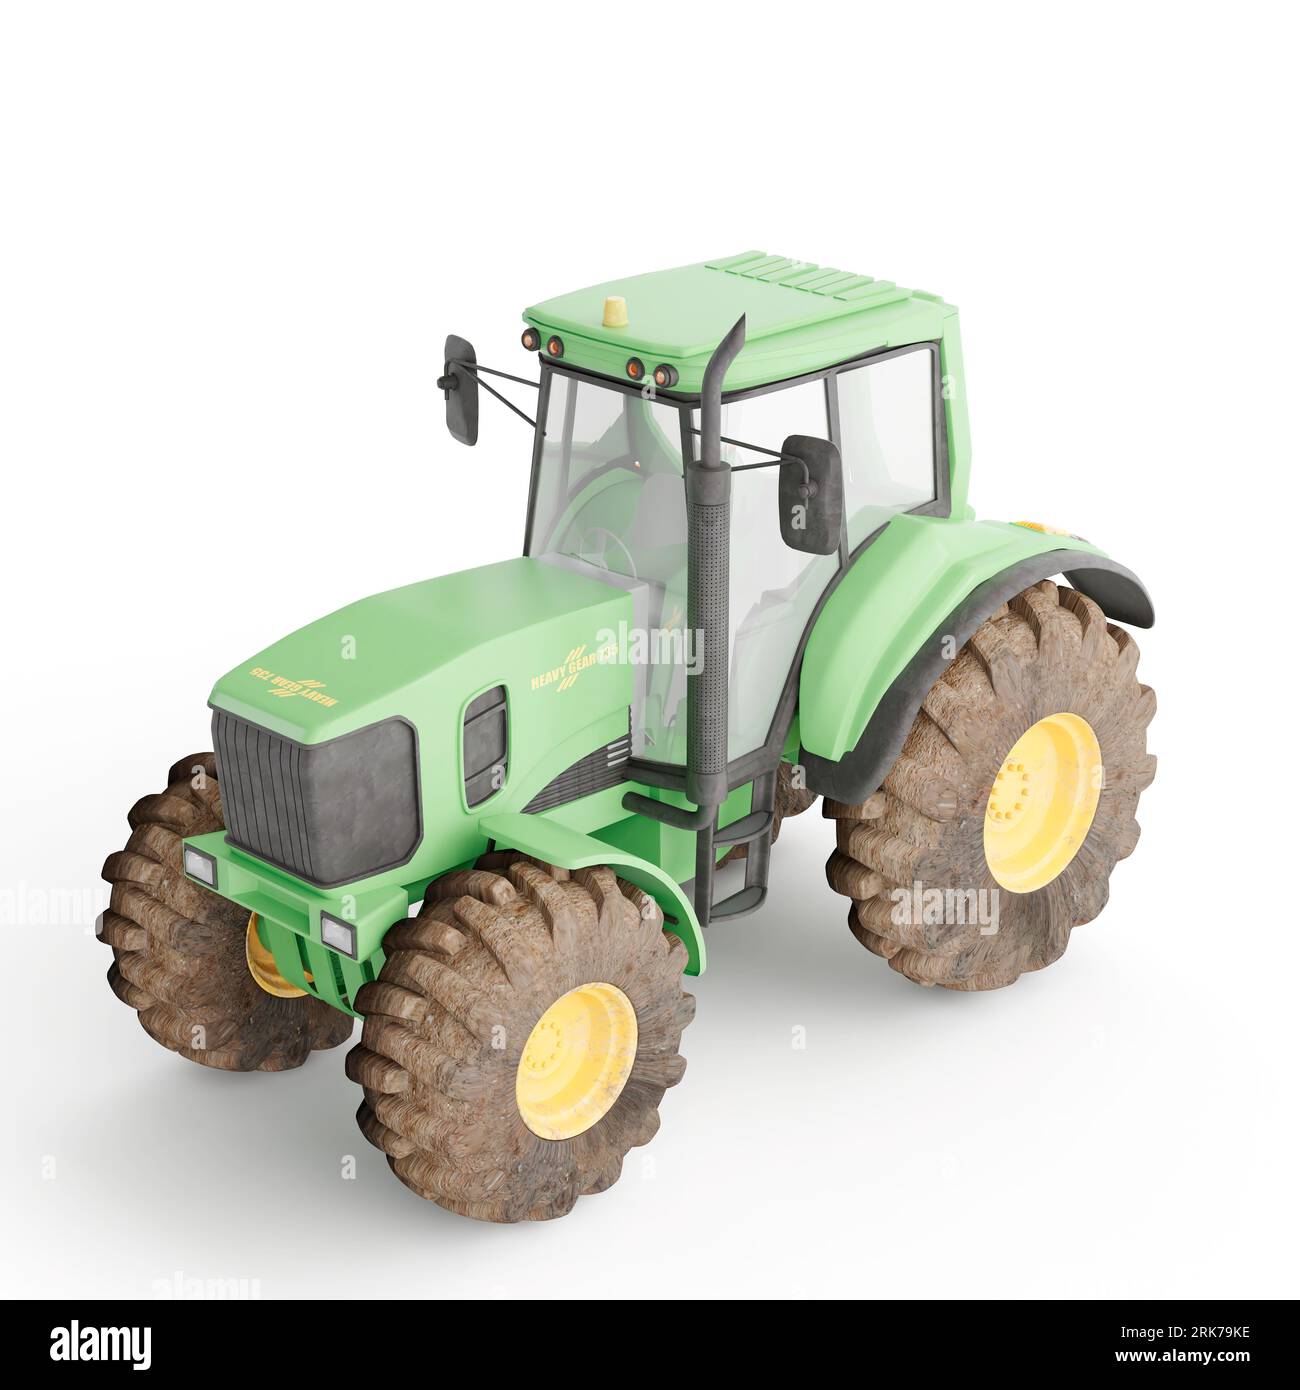 A 3D render of a green tractor standing on a white background Stock Photo